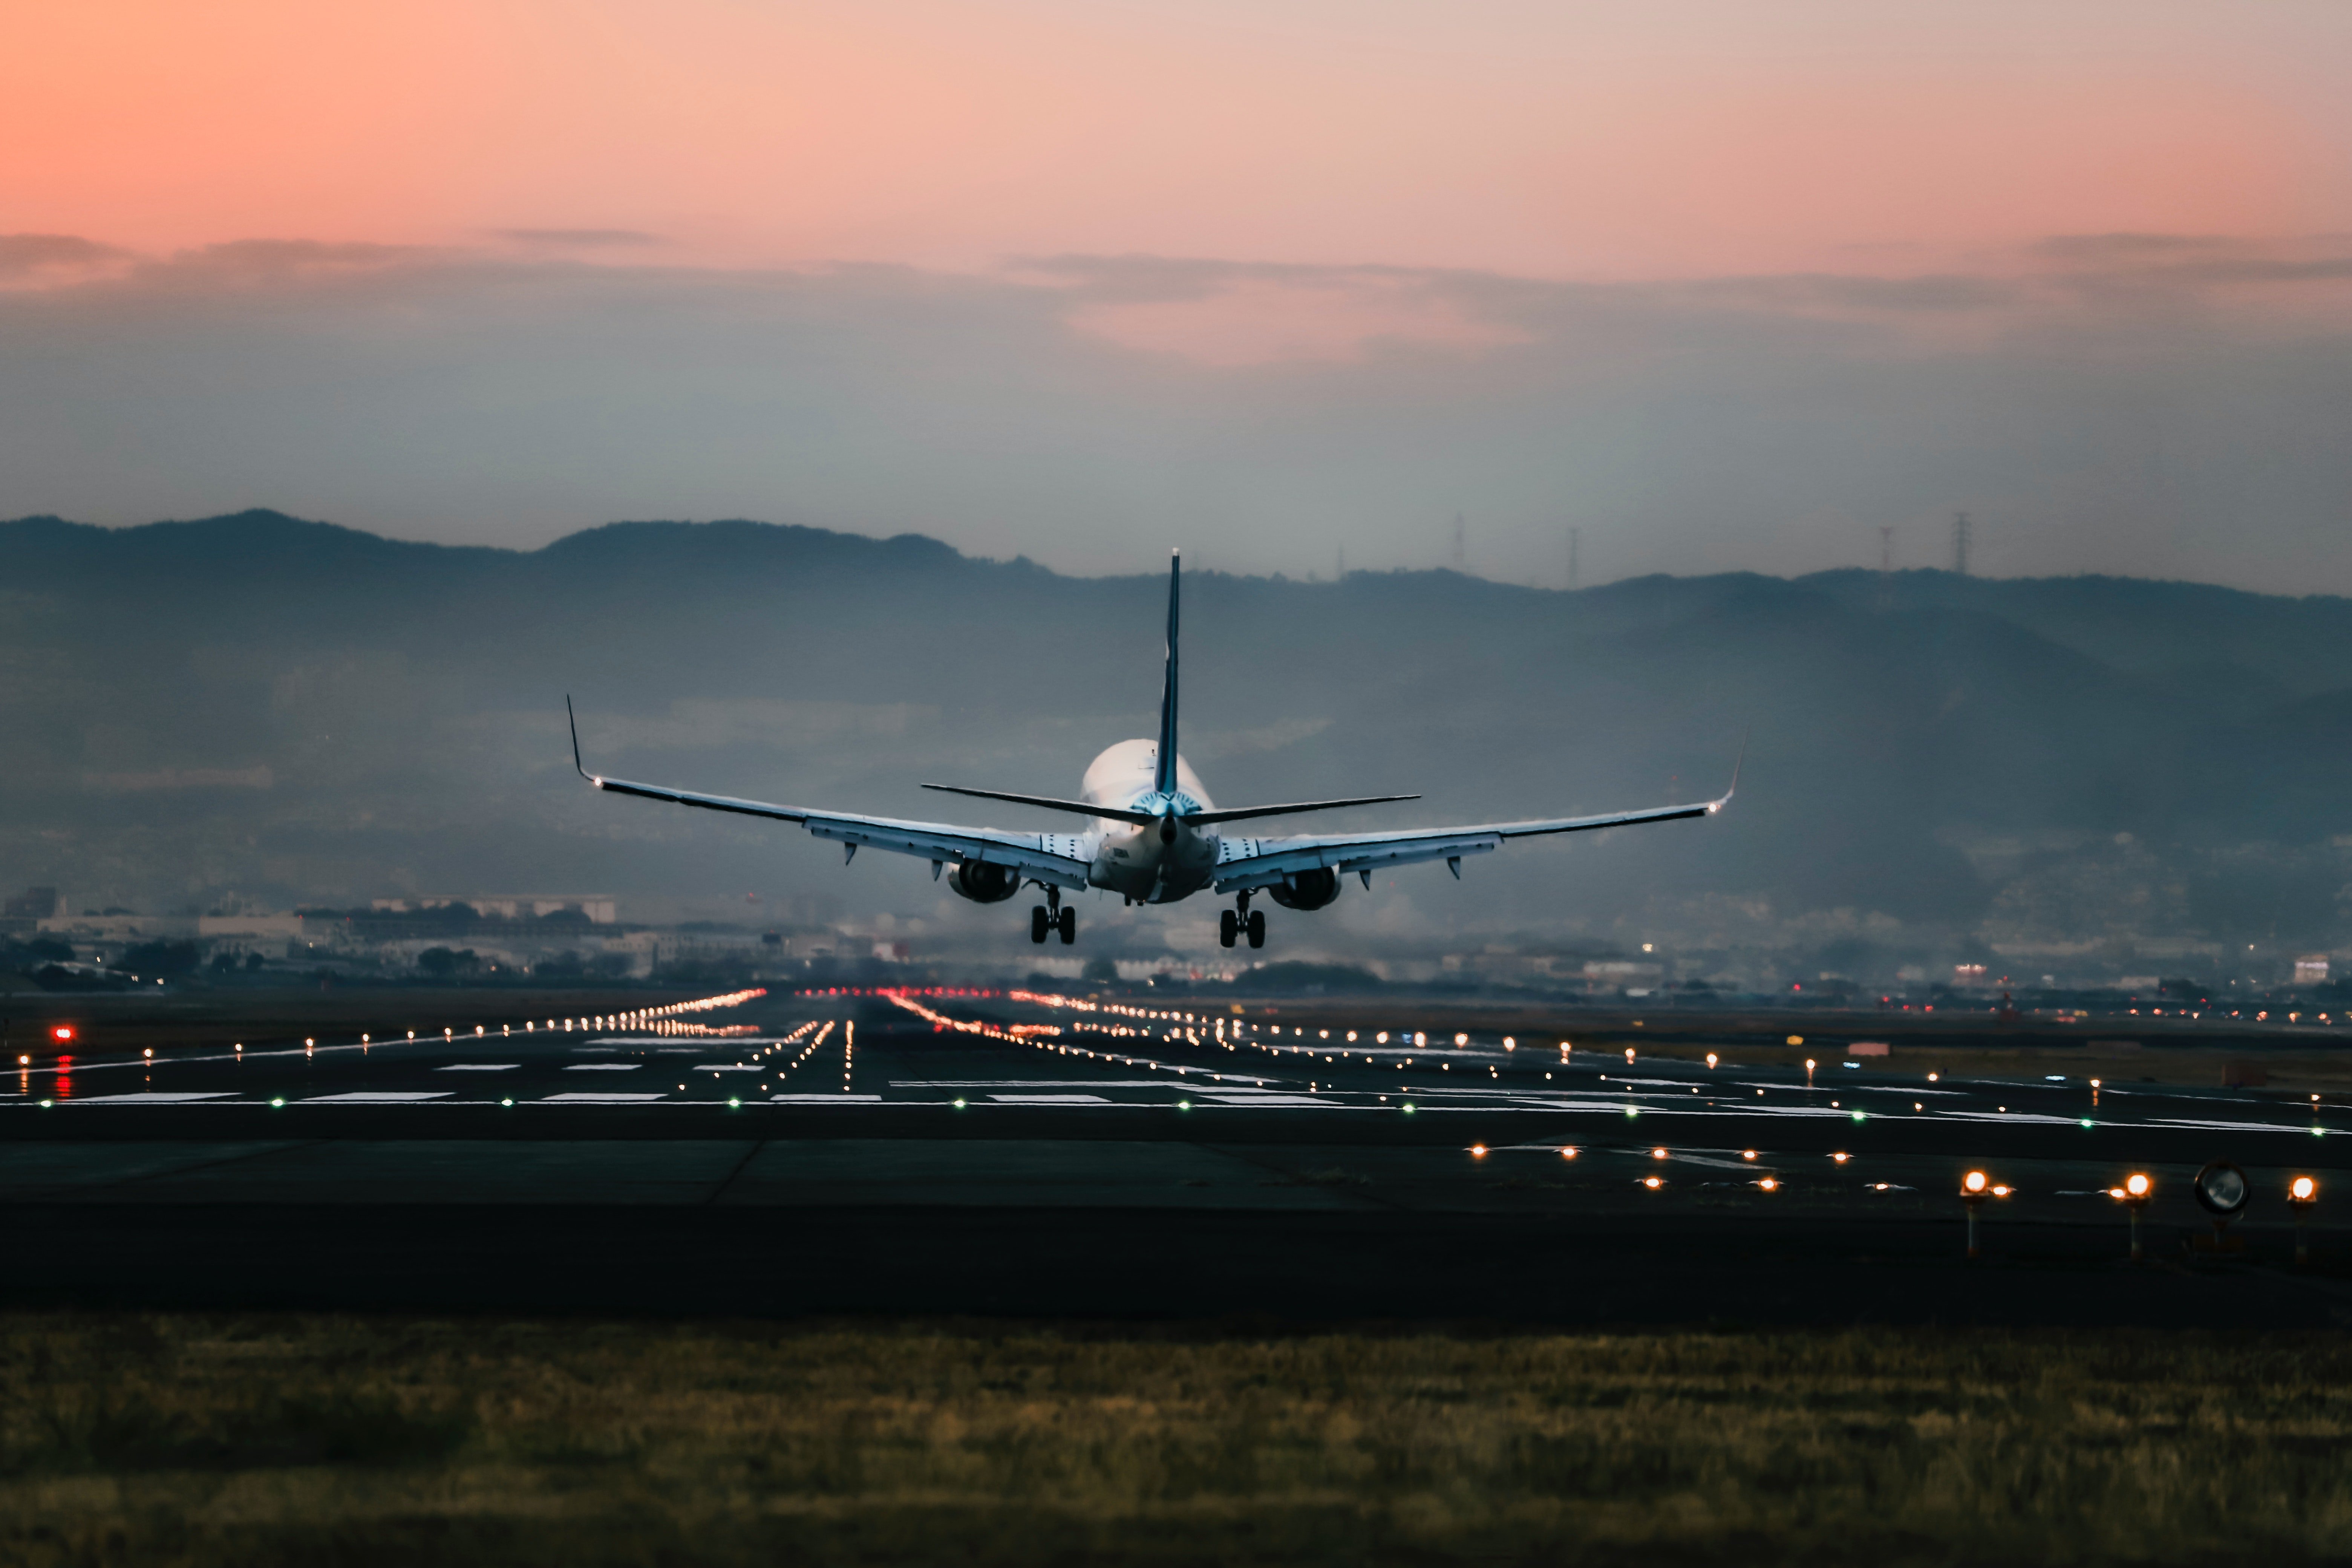 A plane just about to land at the airport | Source: Pexels